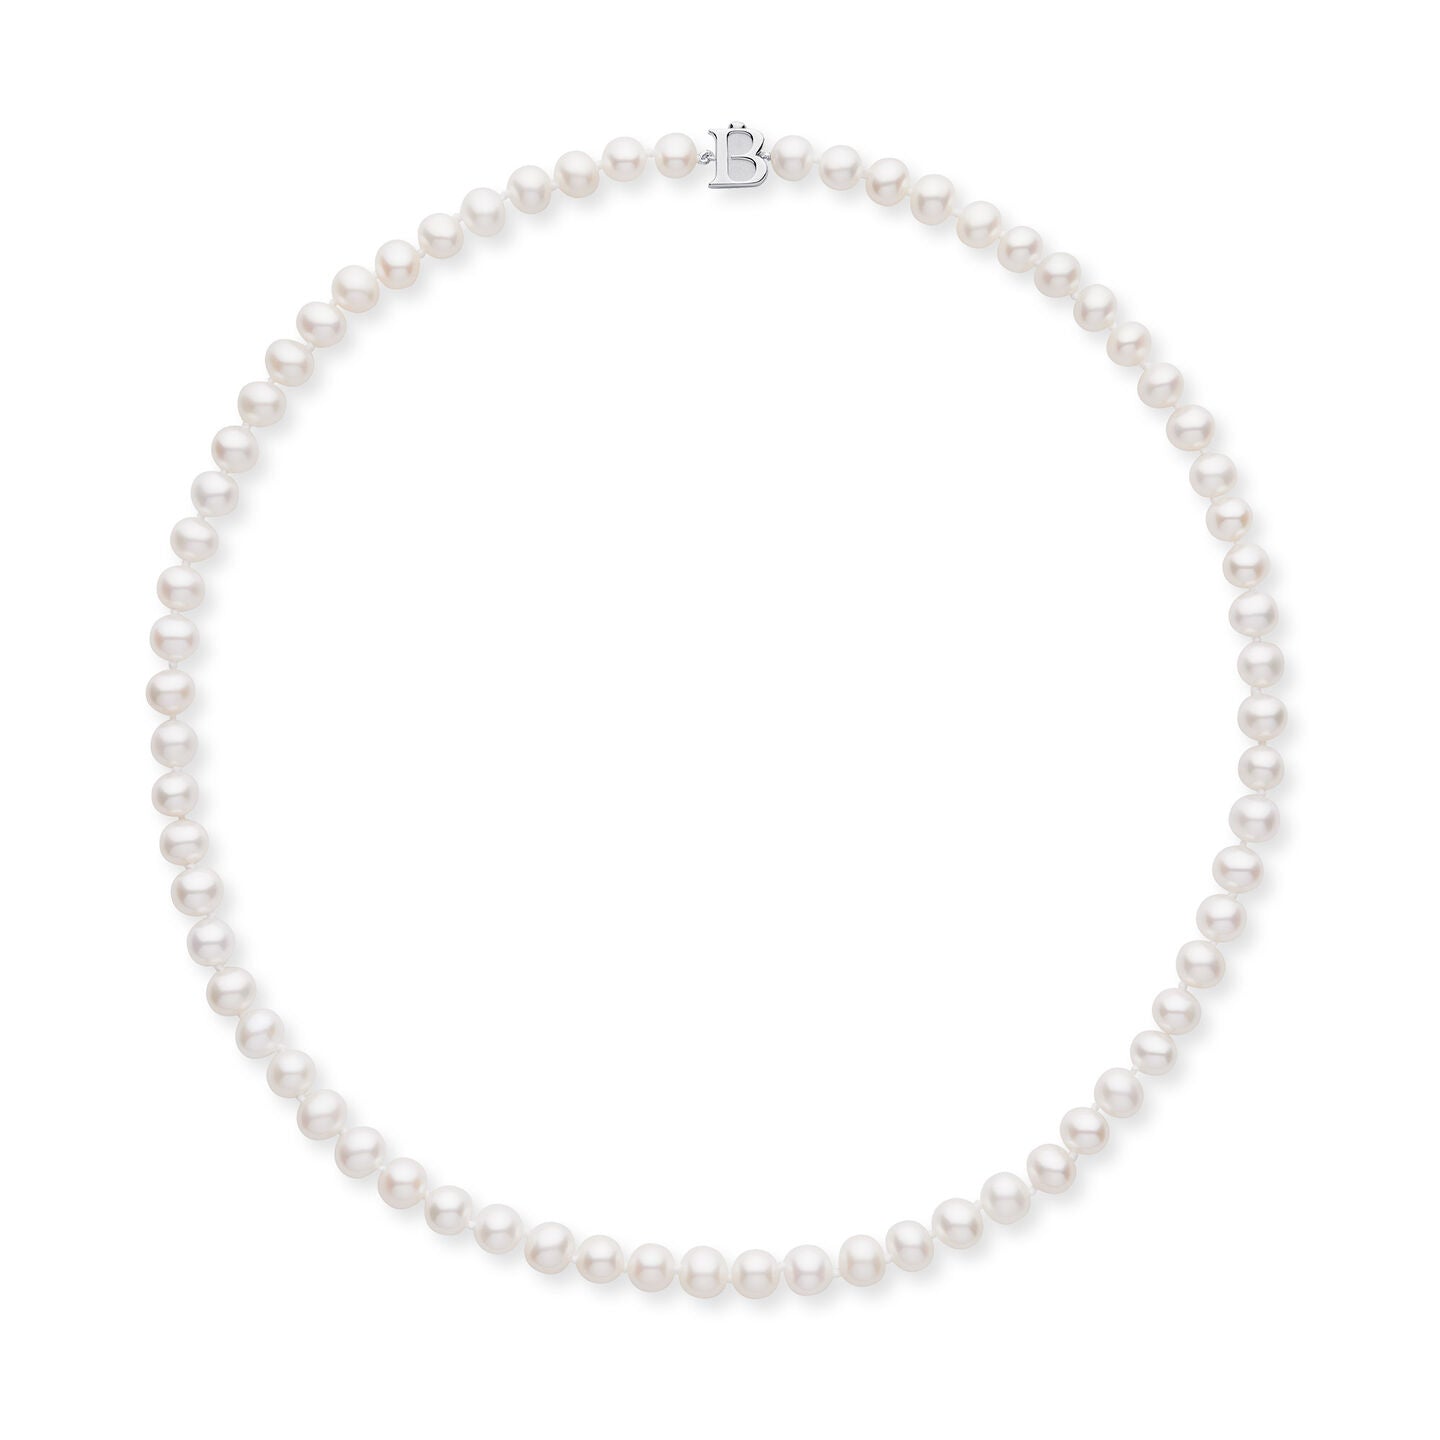 Birks Freshwater Pearl Strand with Silver Clasp